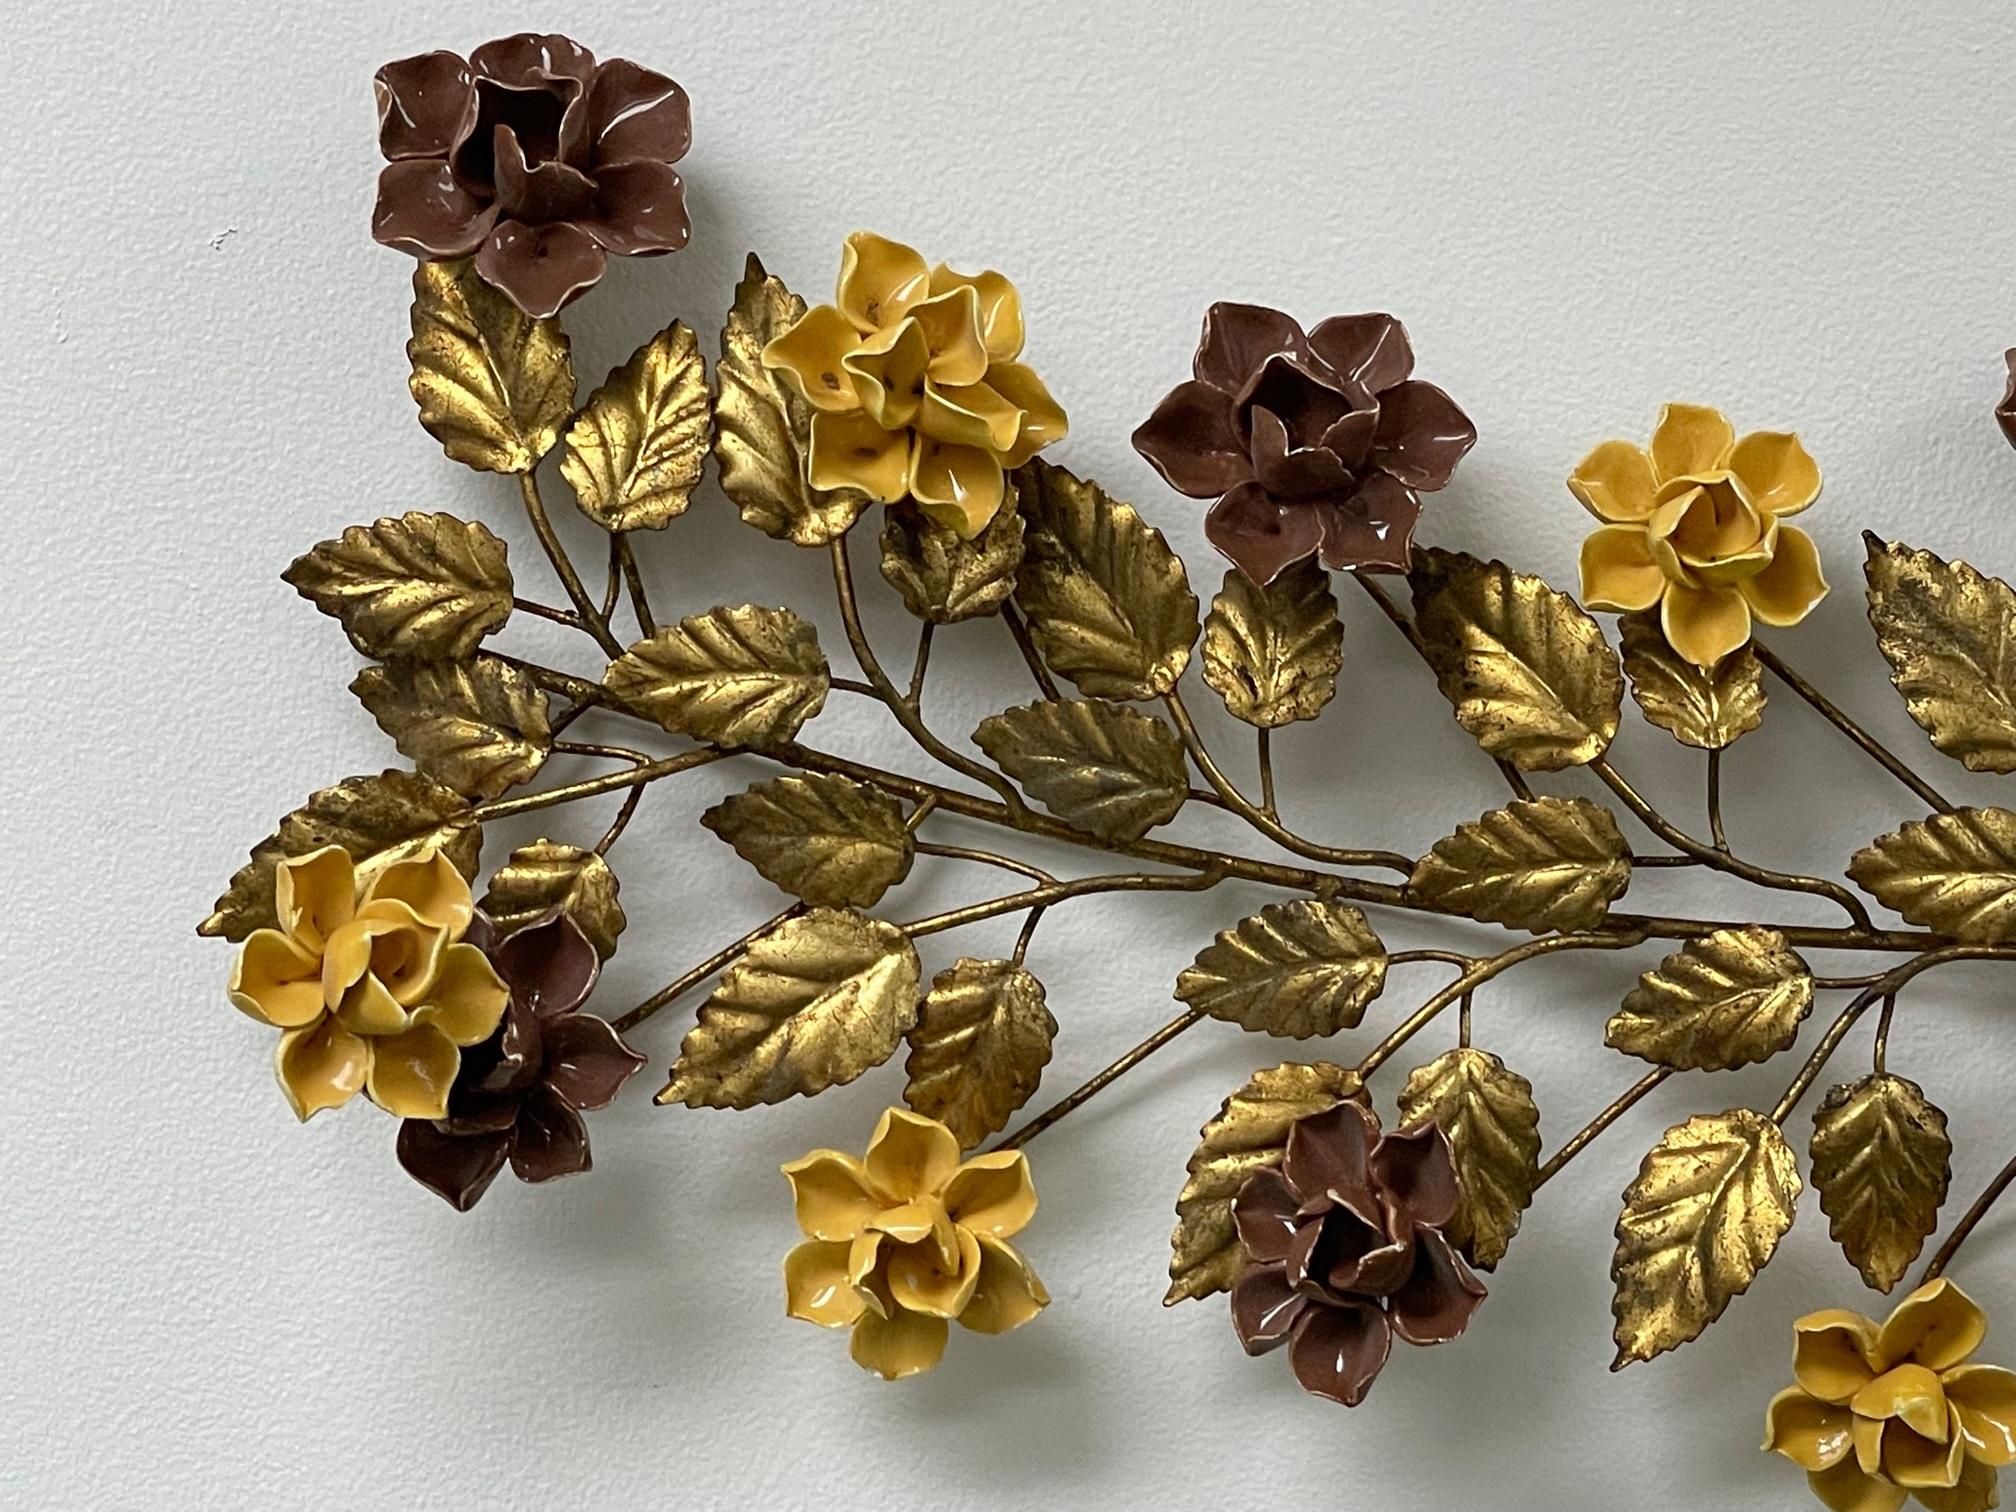 Mid century Florentine toleware wall sculpture features a vine of gold leaves with ceramic roses in gold and brown. Made in Italy tag present. Good condition with minor imperfections consistent with age (see photos). 
For a shipping quote to your